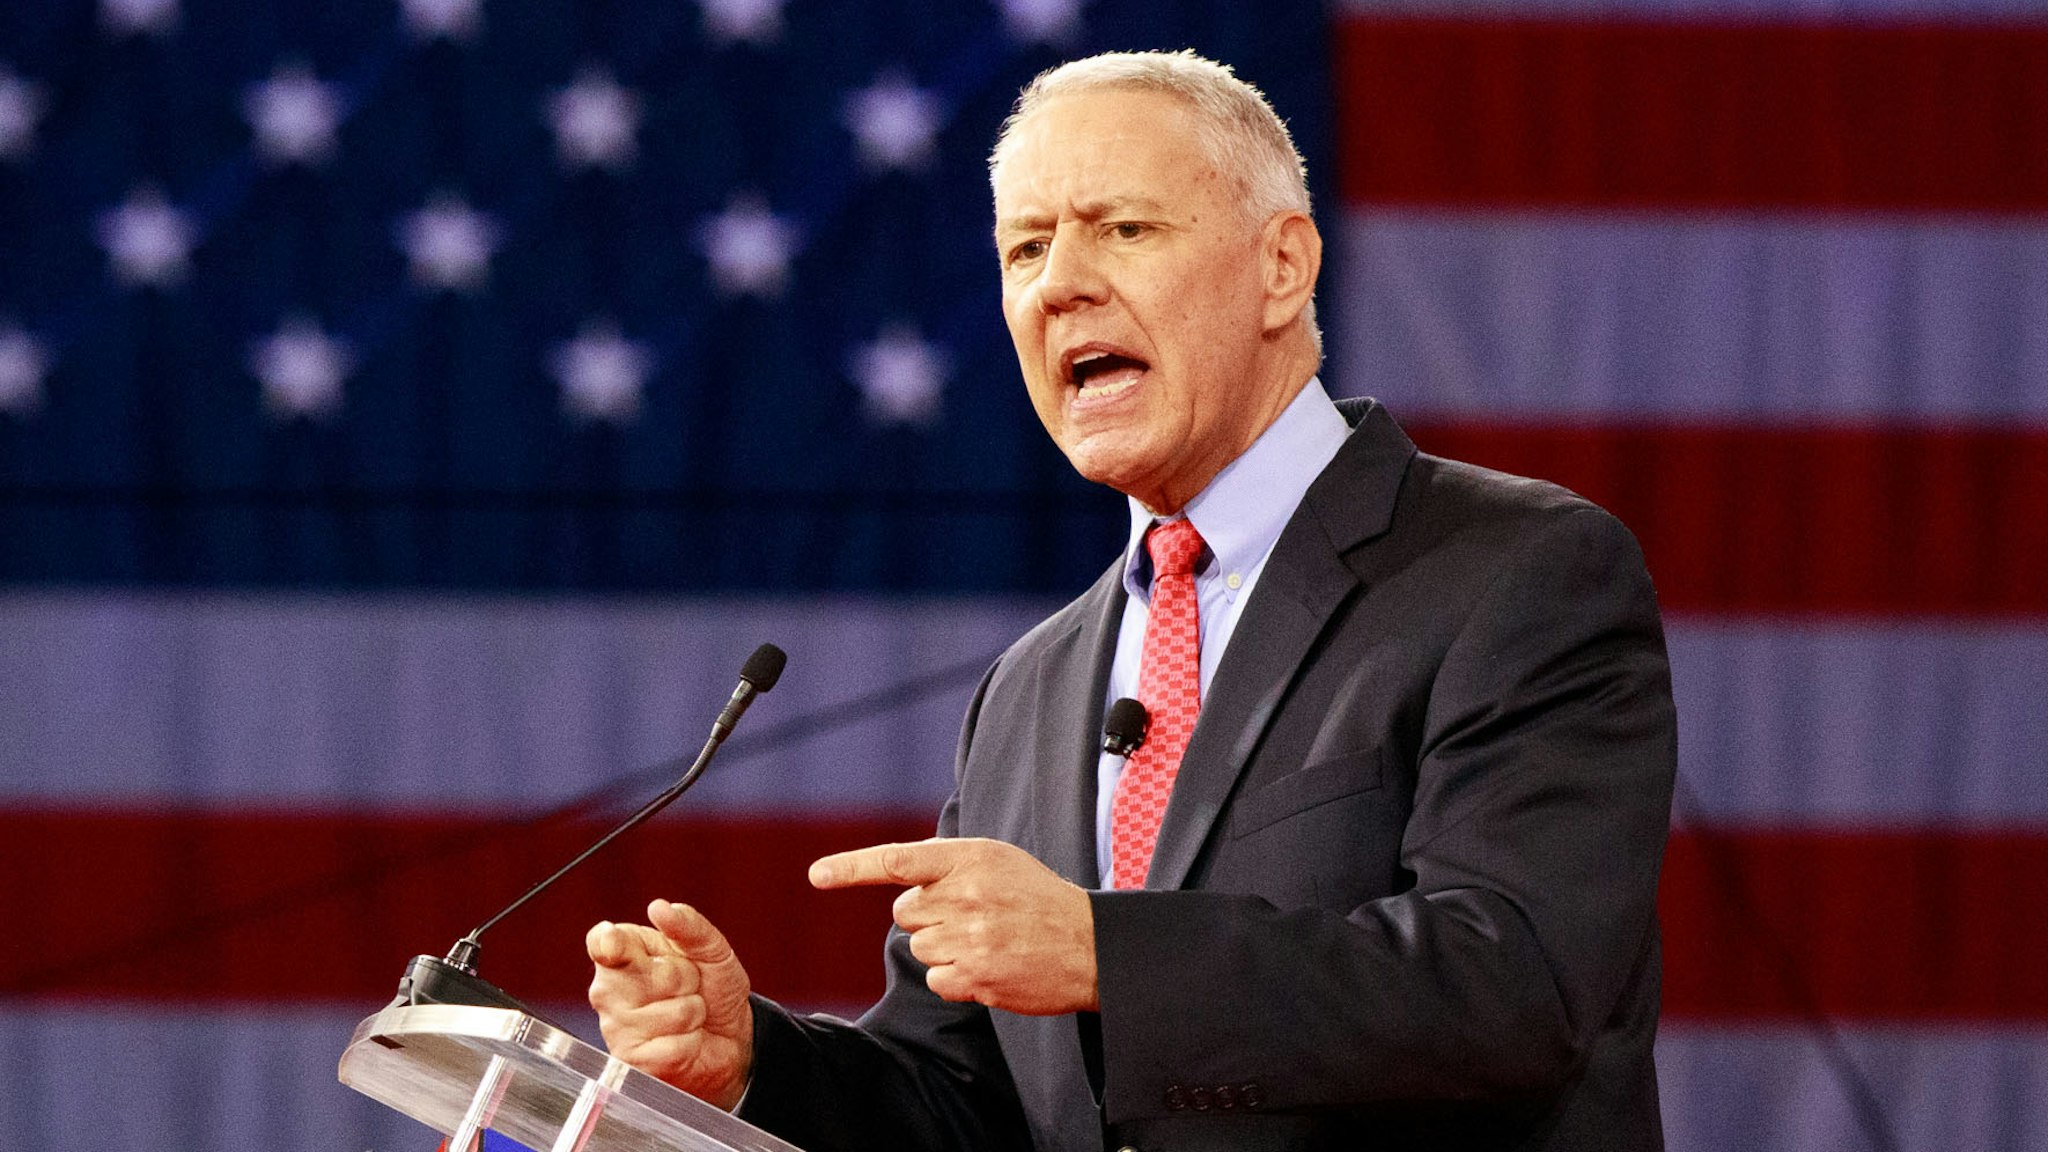 Representative Ken Buck, a Republican from Colorado, speaks during the Conservative Political Action Conference (CPAC) in Orlando, Florida, U.S., on Friday, Feb. 25, 2022. Launched in 1974, the Conservative Political Action Conference is the largest gathering of conservatives in the world.